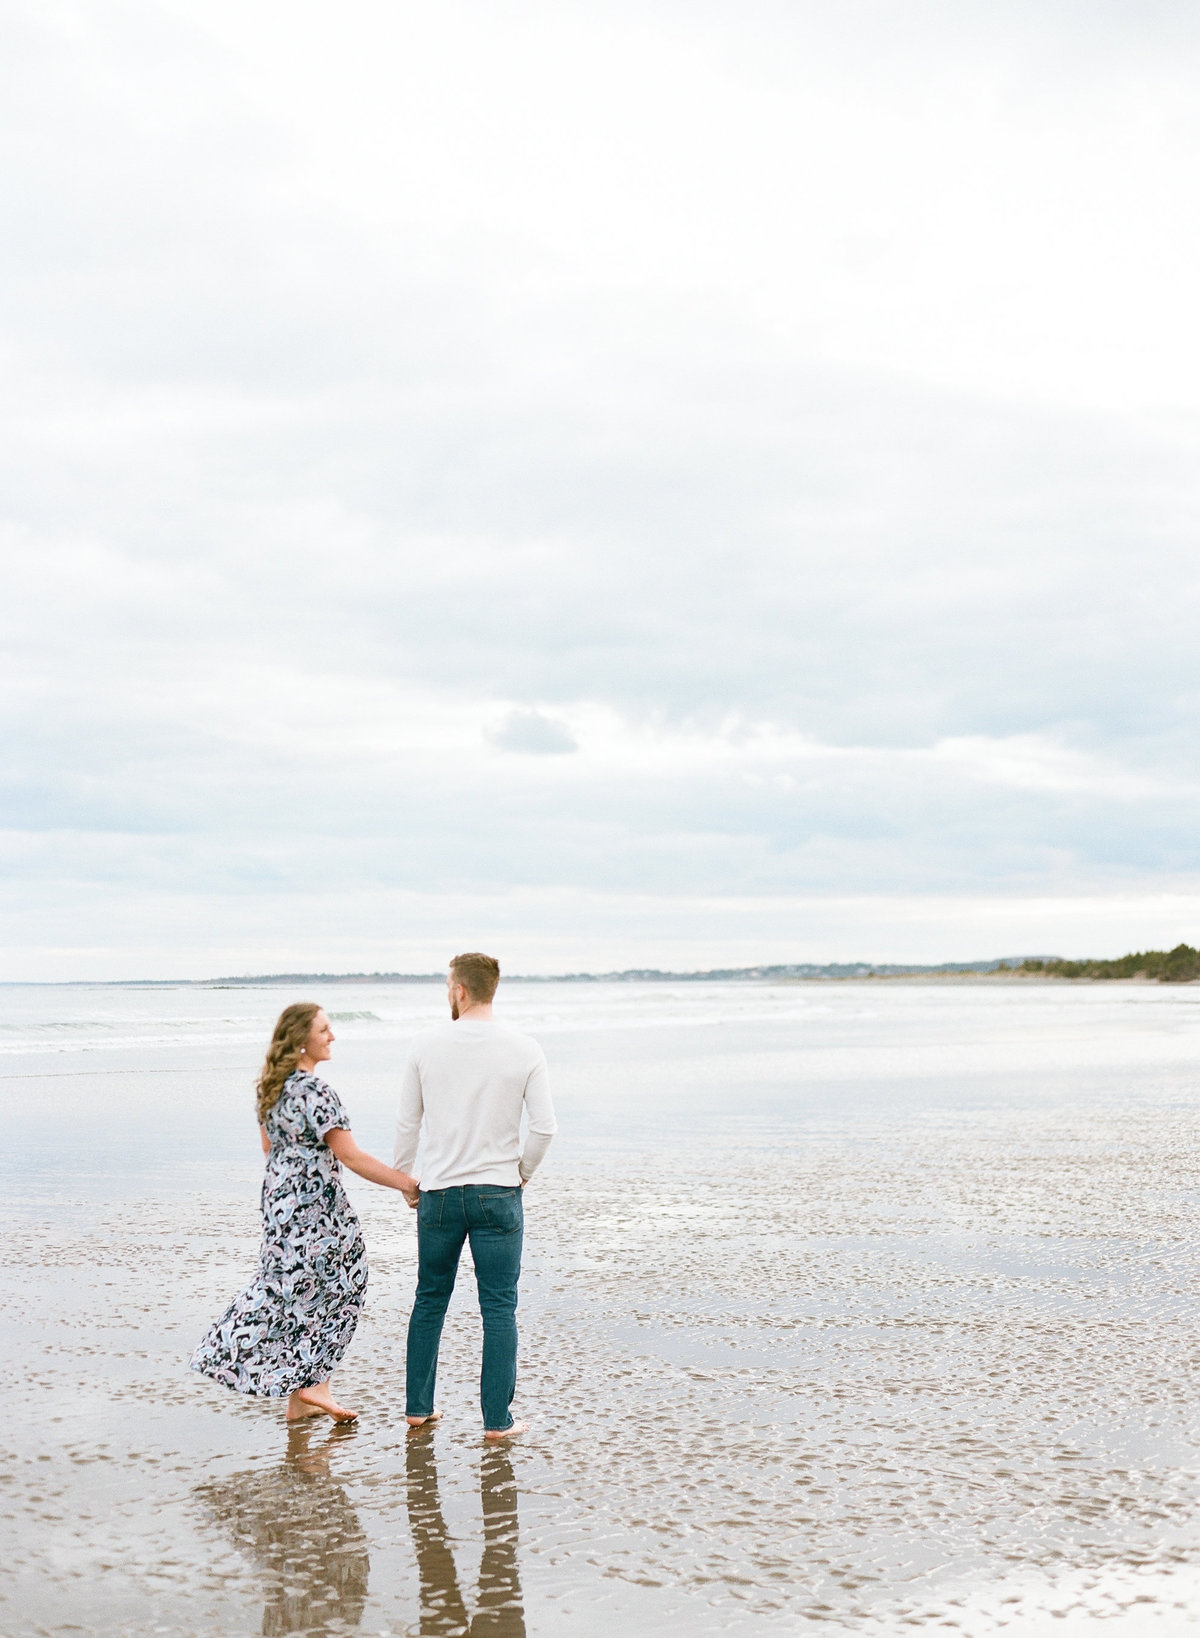 Jacqueline Anne Photography - Akayla and Andrew - Lawrencetown Beach-15